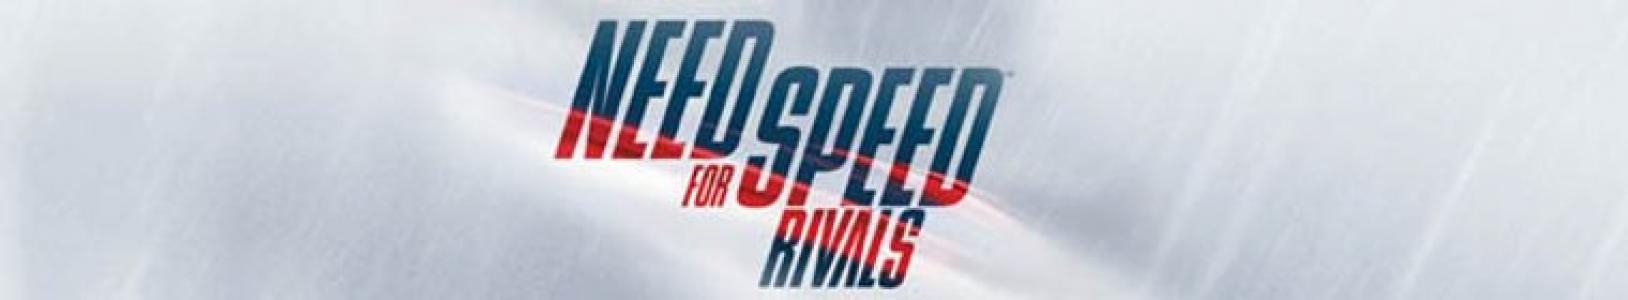 Need for Speed: Rivals banner